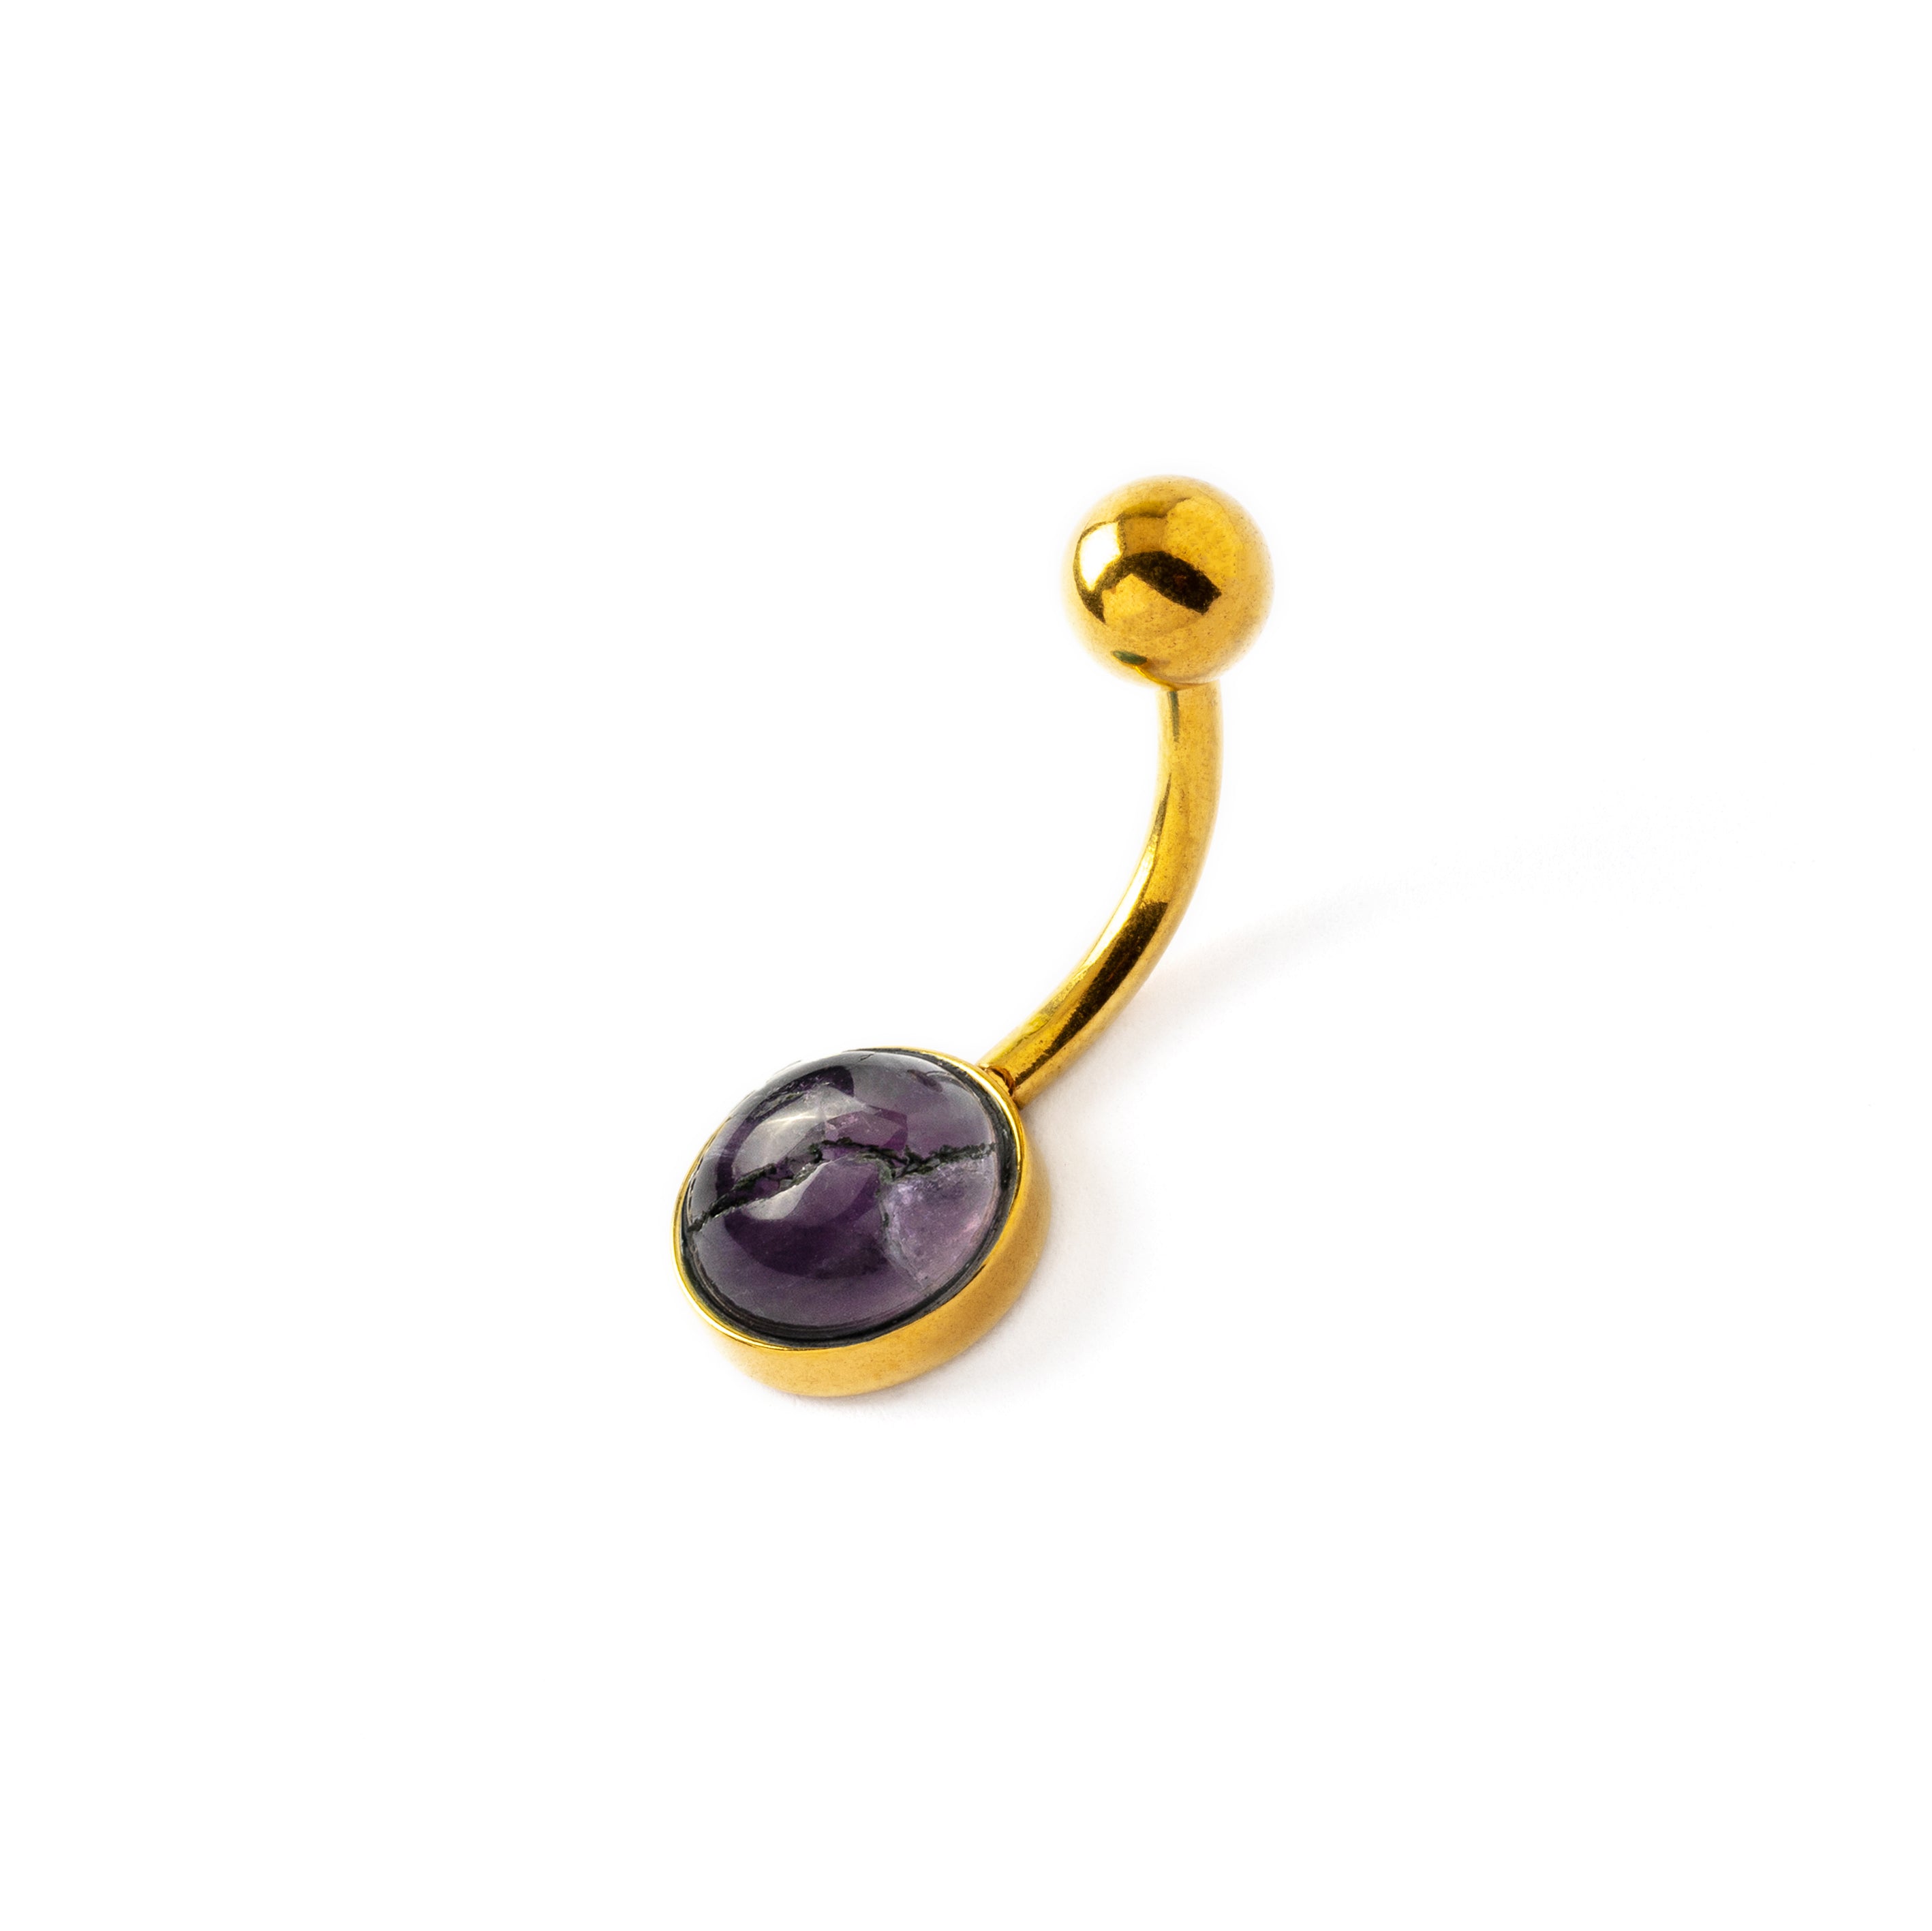 Golden Belly Bar with Amethyst right side view